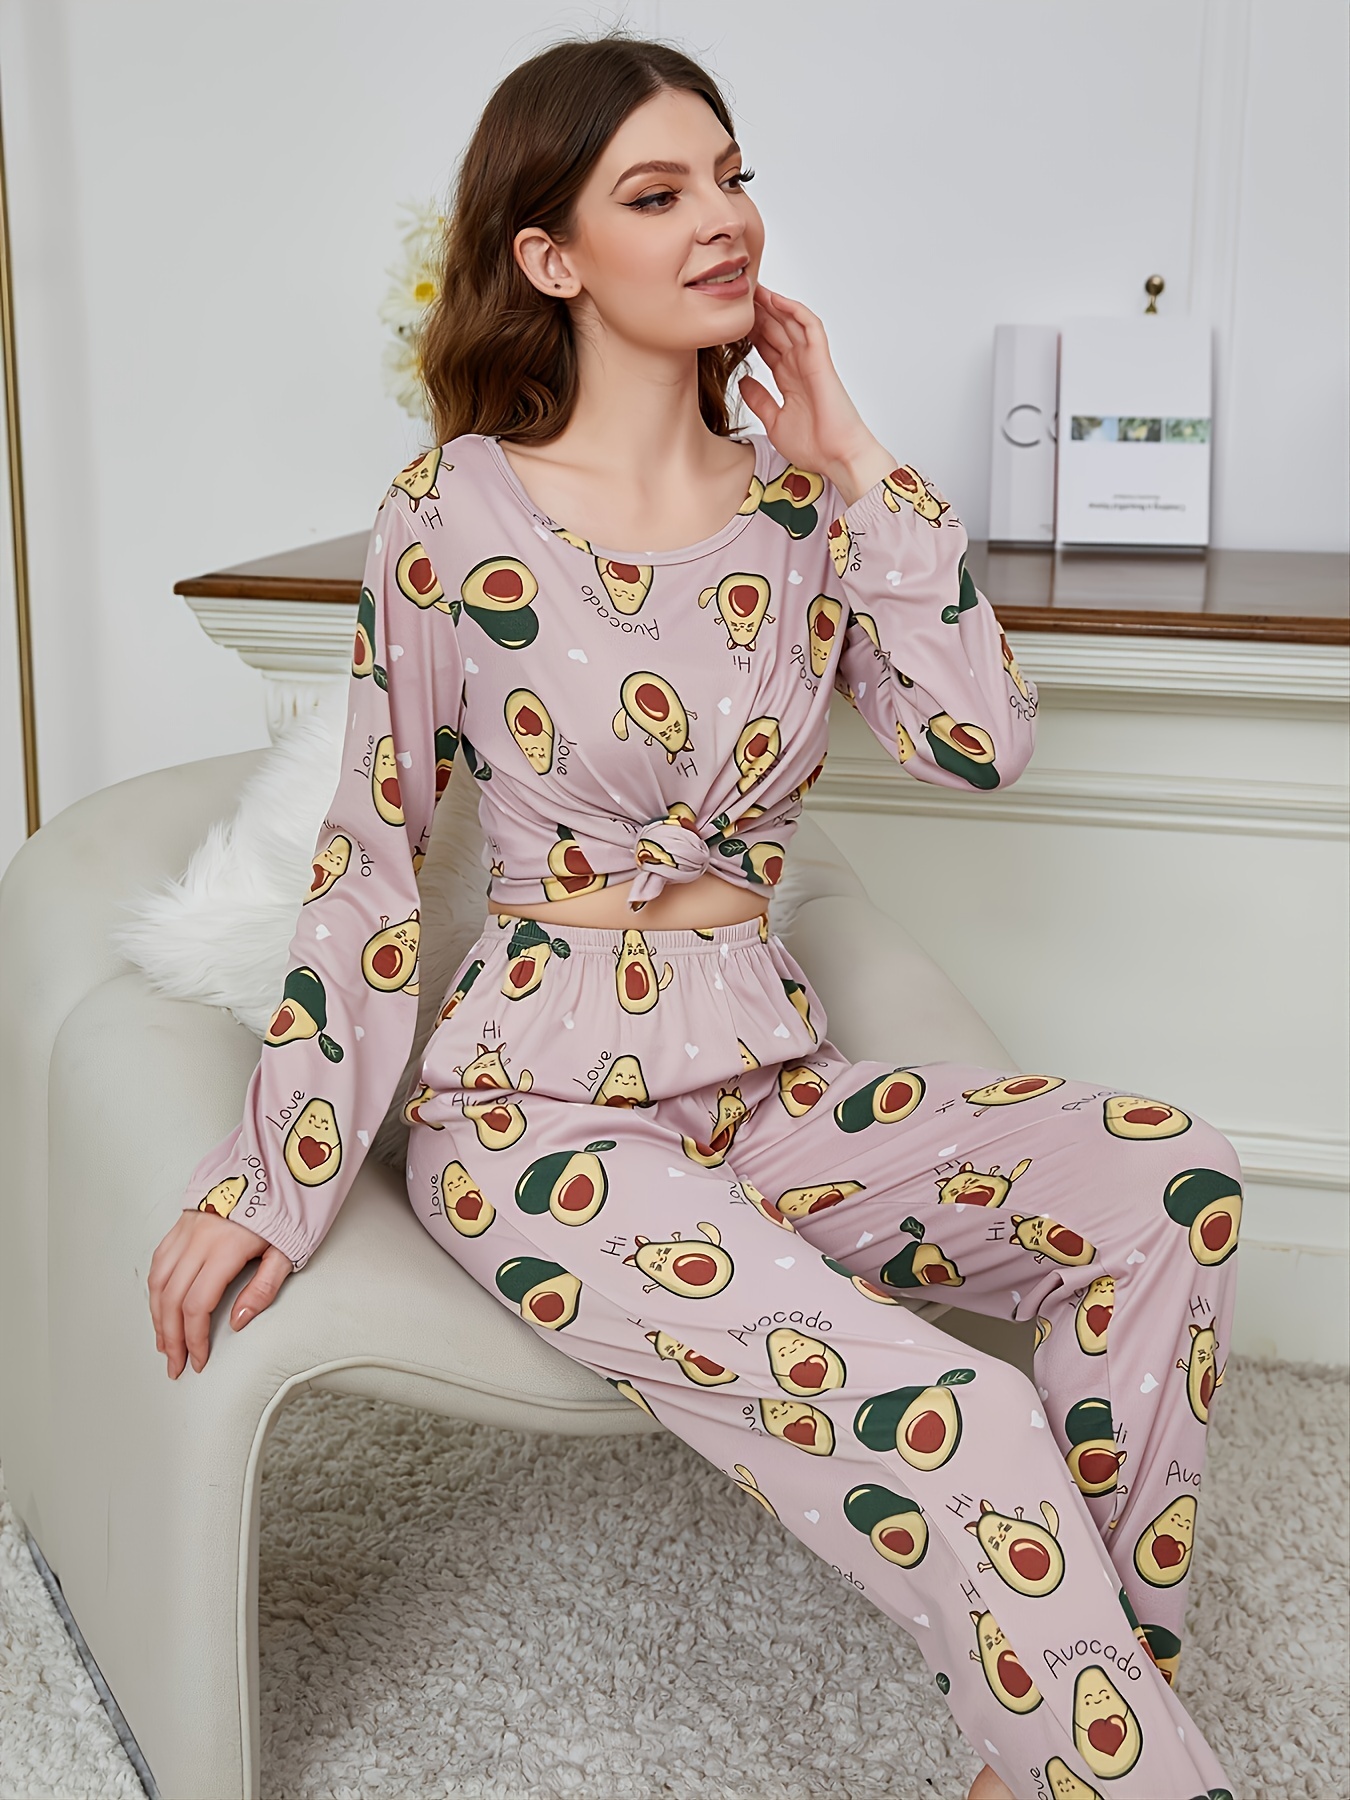 Avocado Cotton Pajama Set For Women Comfortable Pep Sleepwear For Ladies  And Home Clothes From Lu006, $19.95